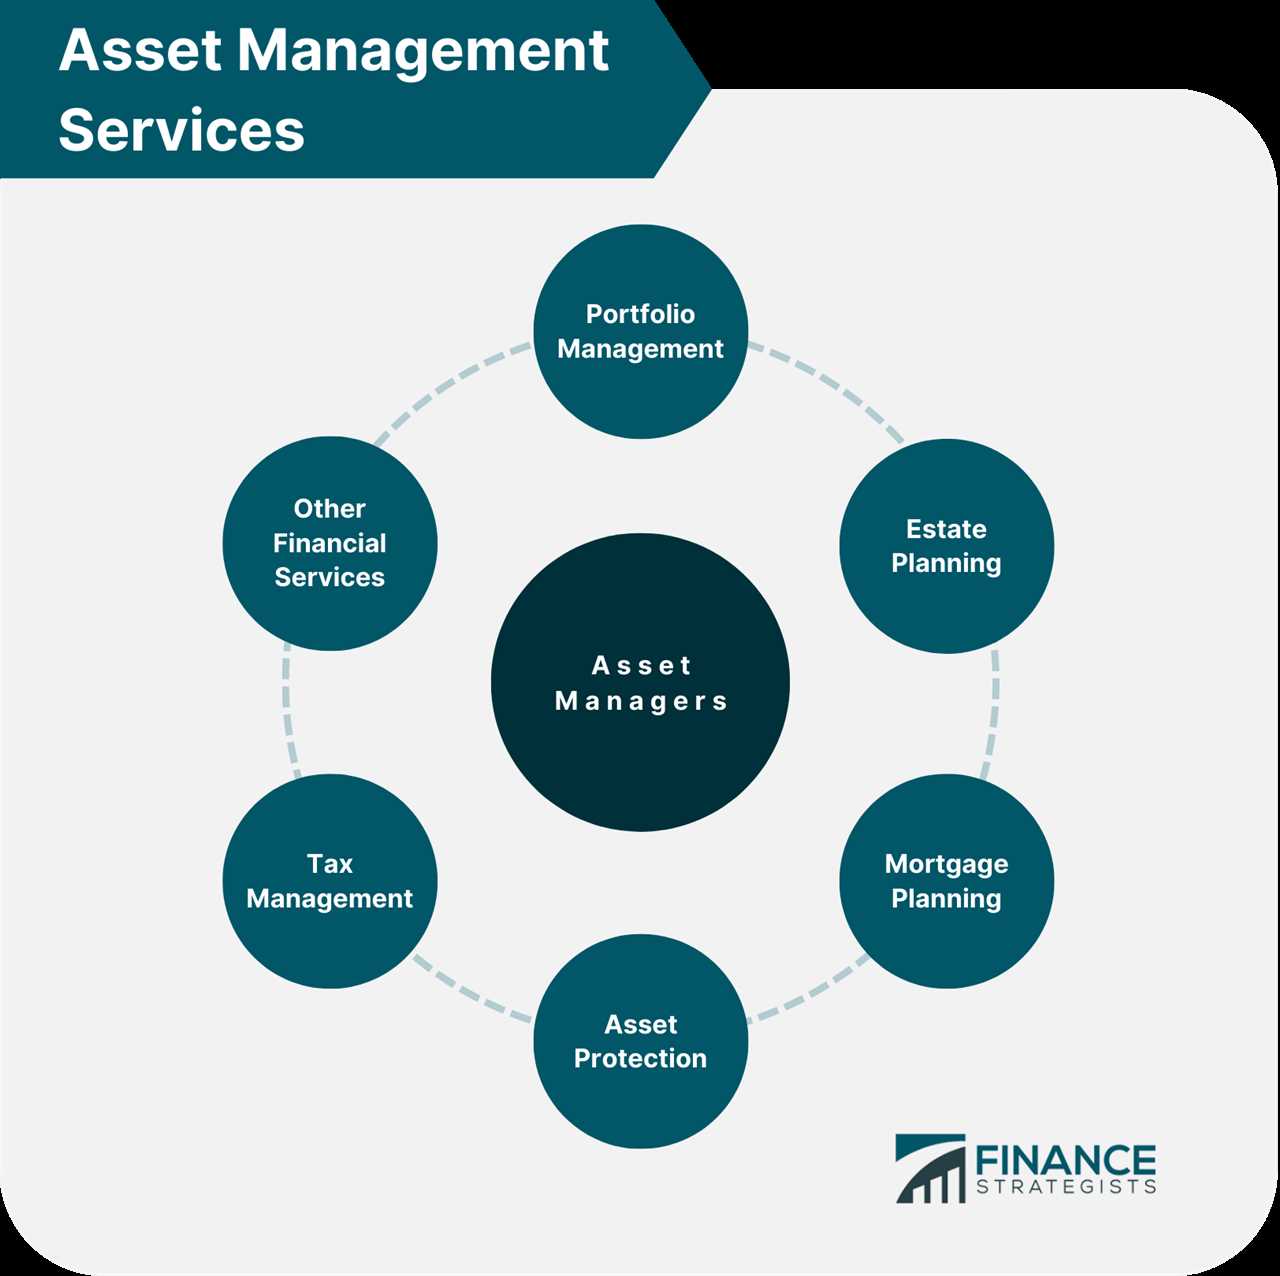 Top Money Managers by Assets